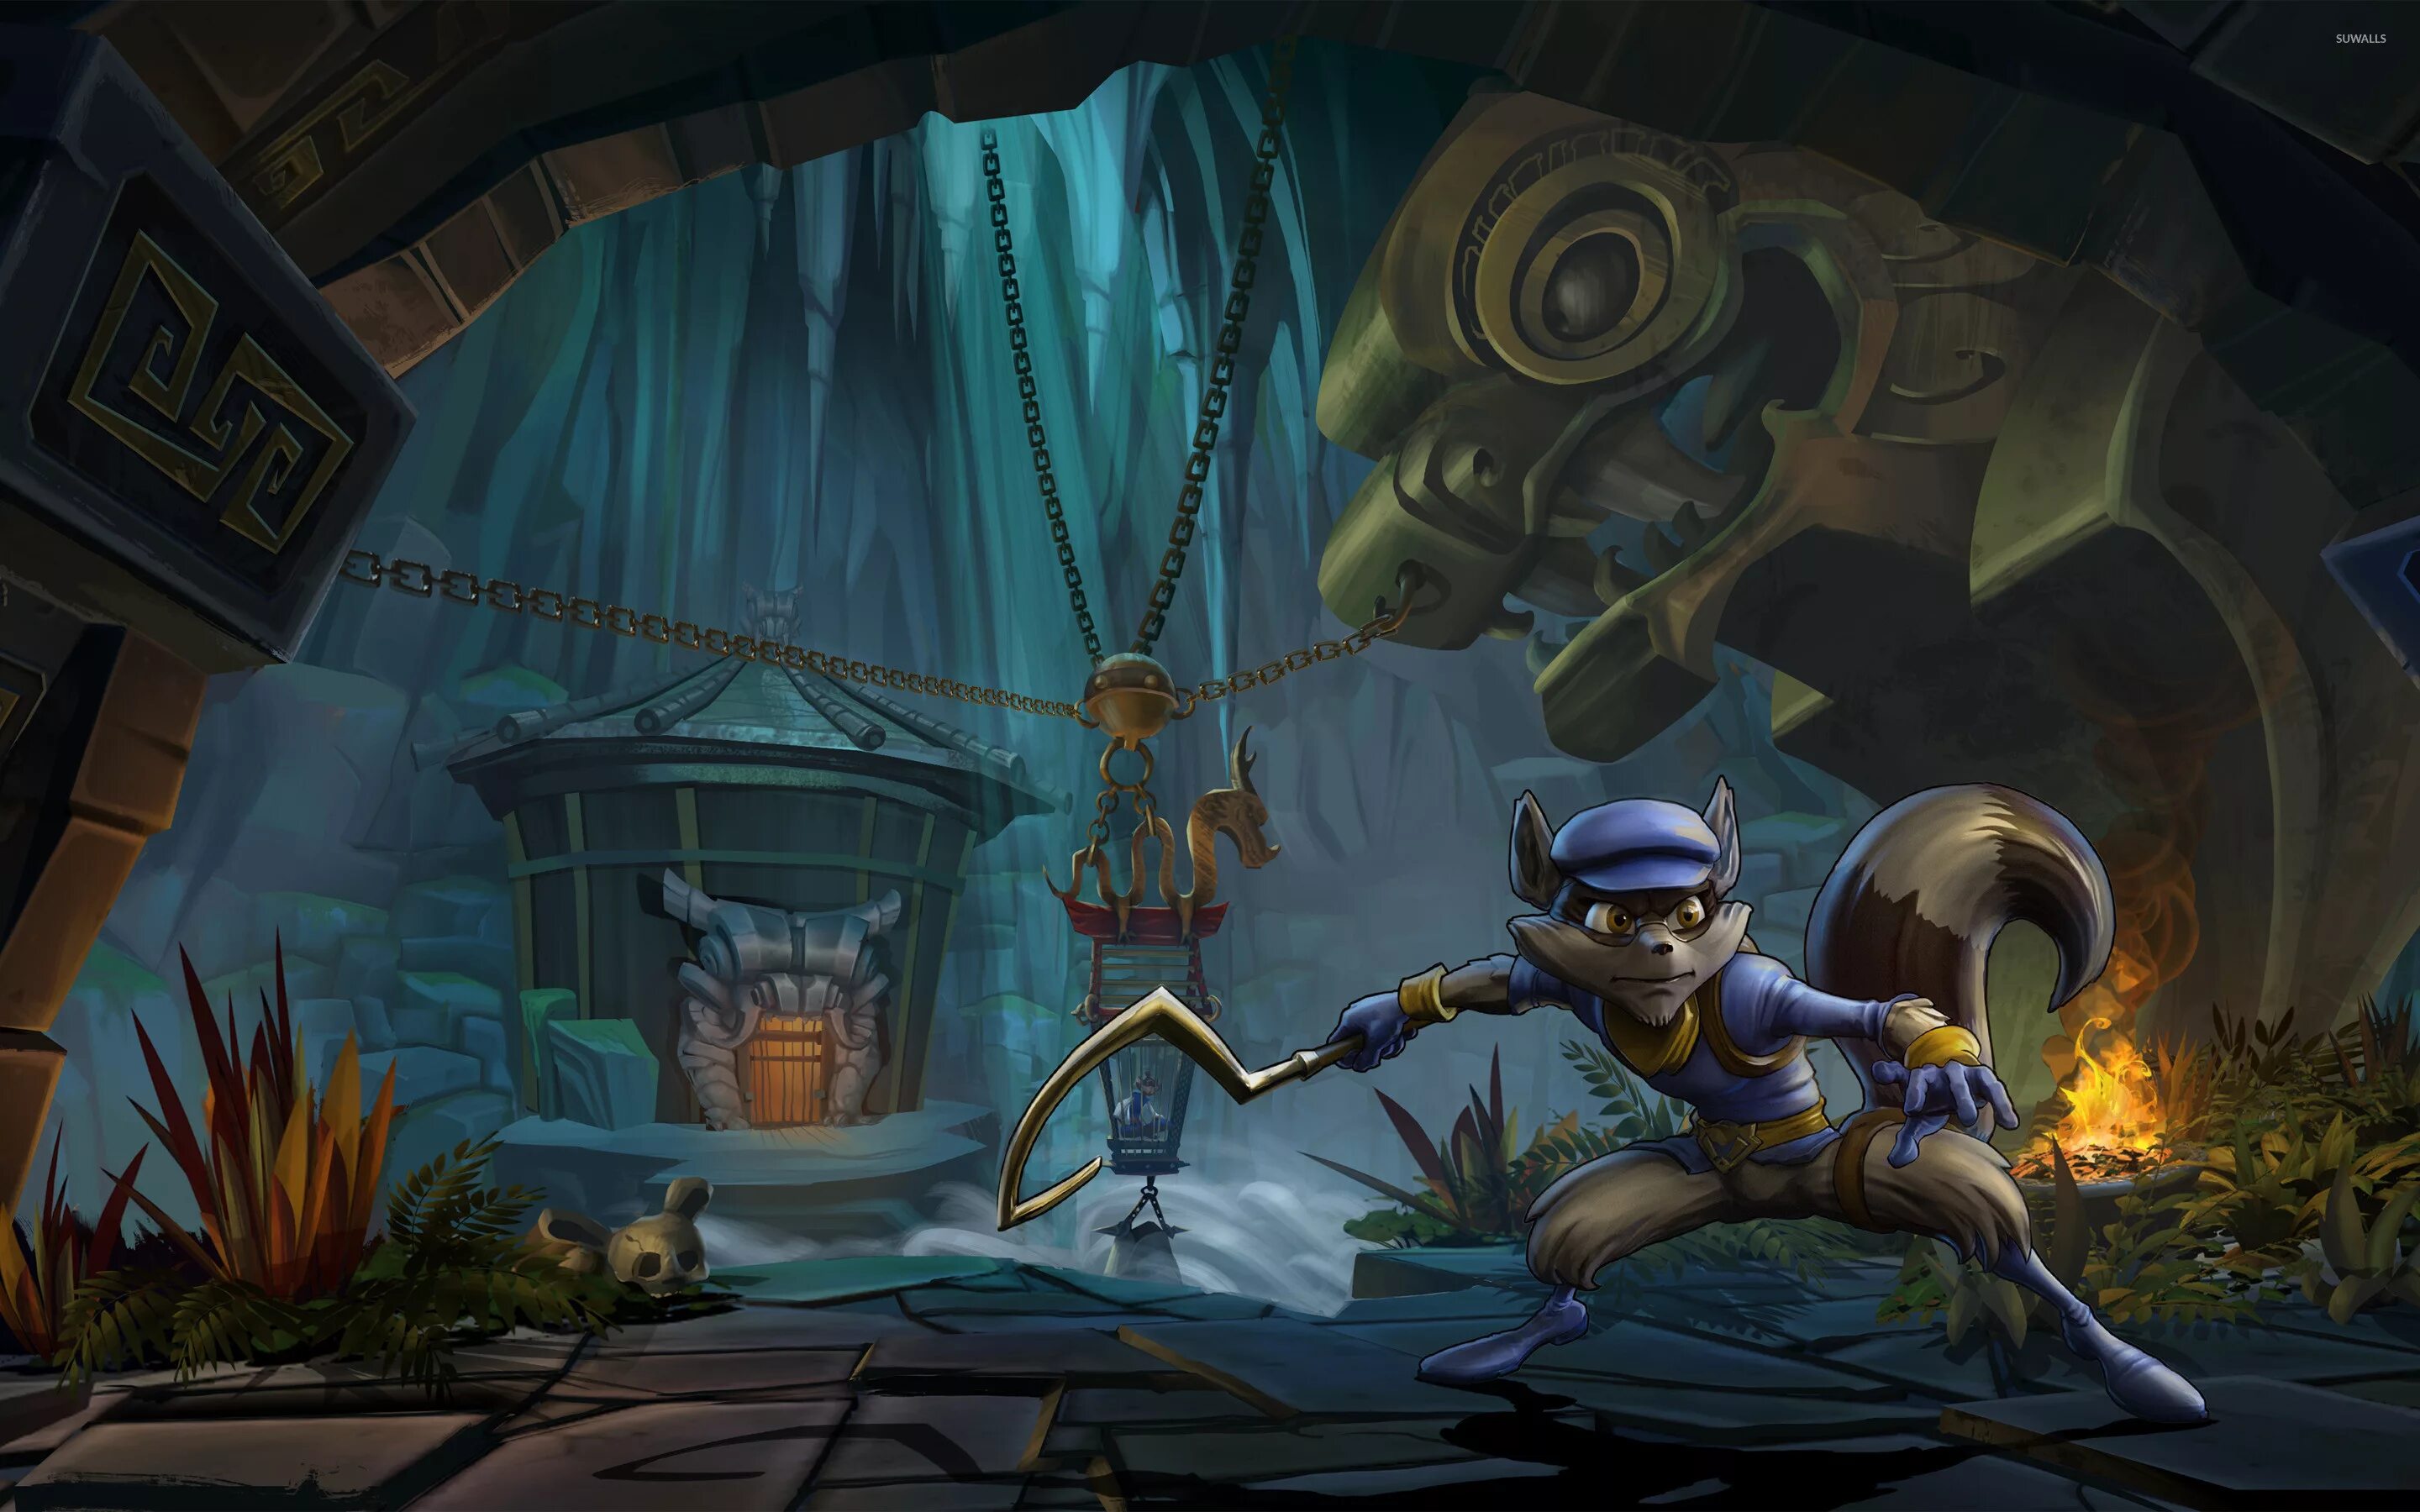 Игра слай. Sly Cooper. Sly Cooper игра. Слай Купер 4. Sly Cooper Thieves in time.